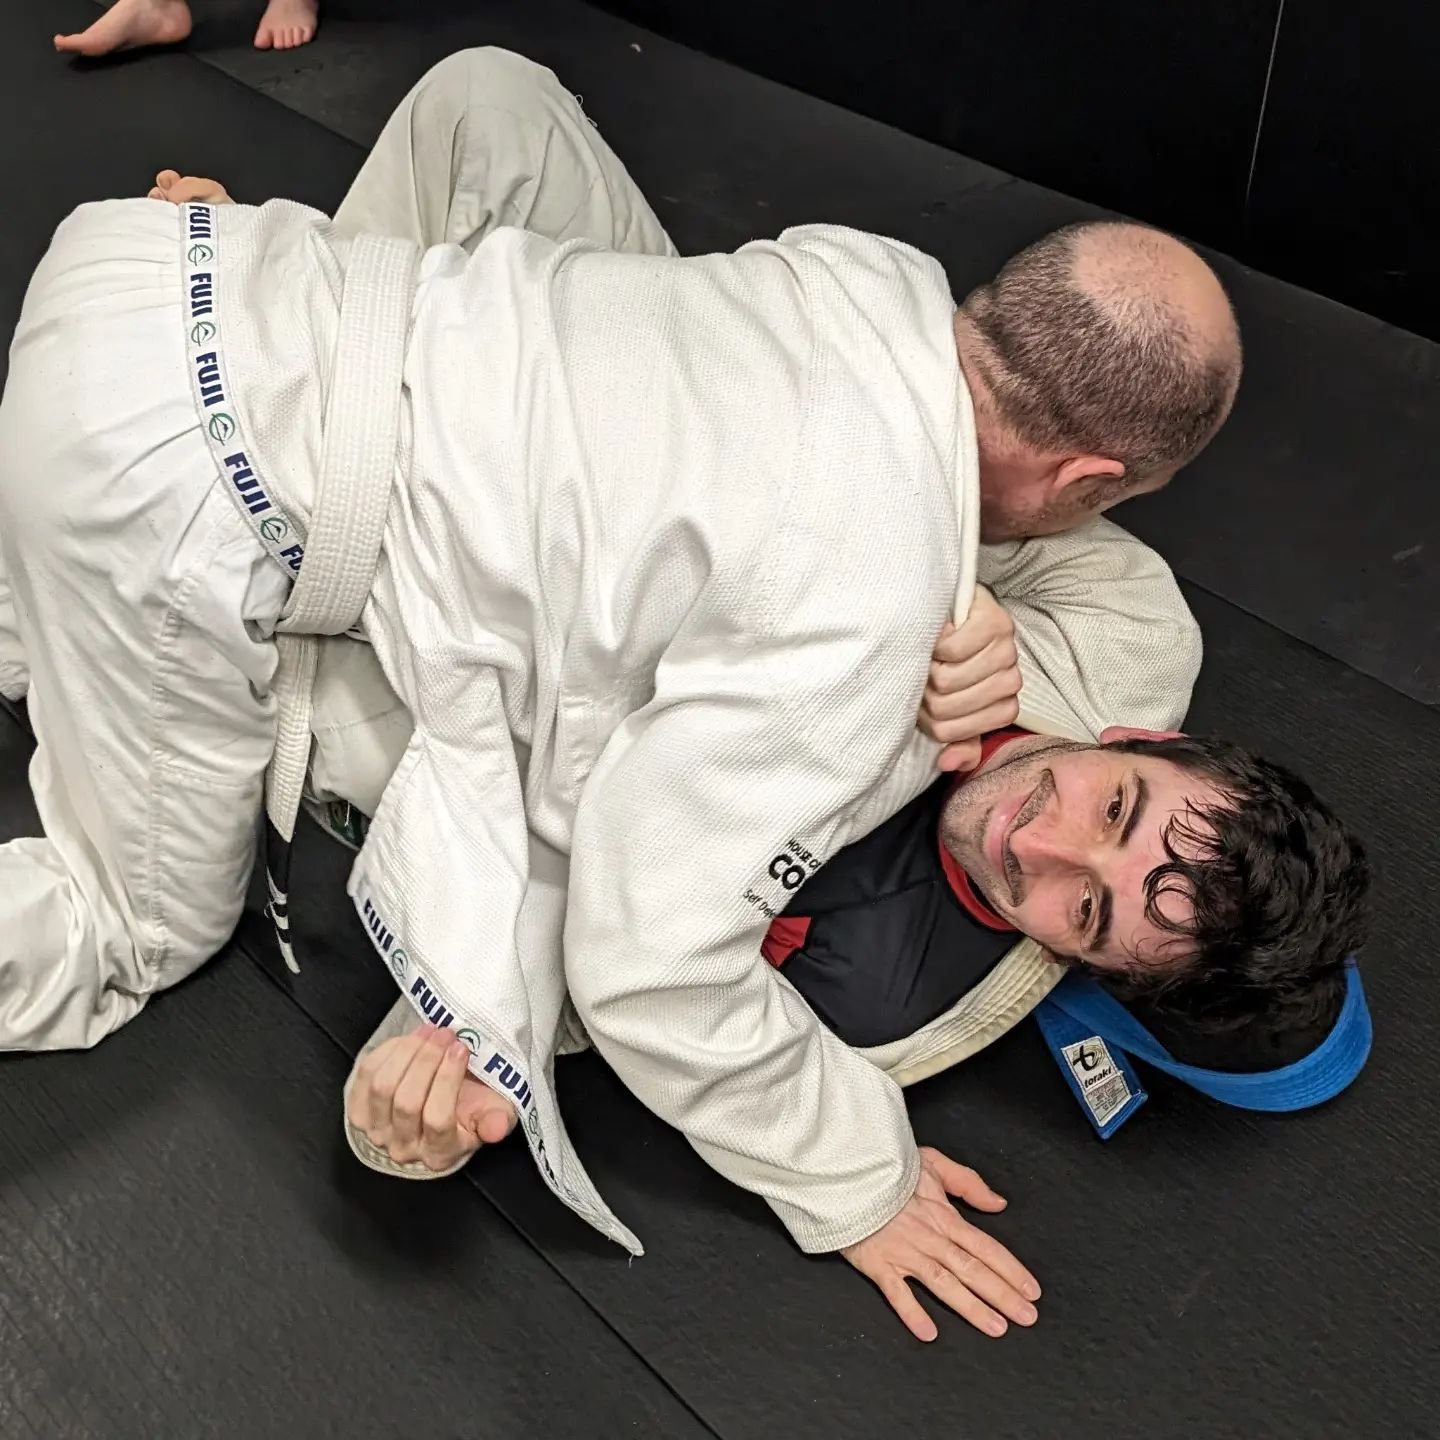 Priceless: The smile of a blue belt back on the mats after a long hiatus for med school and residency. Good to have you back DR PAUL!
.
.
.
#bjjlifestyle #bluebelt #medschoollife